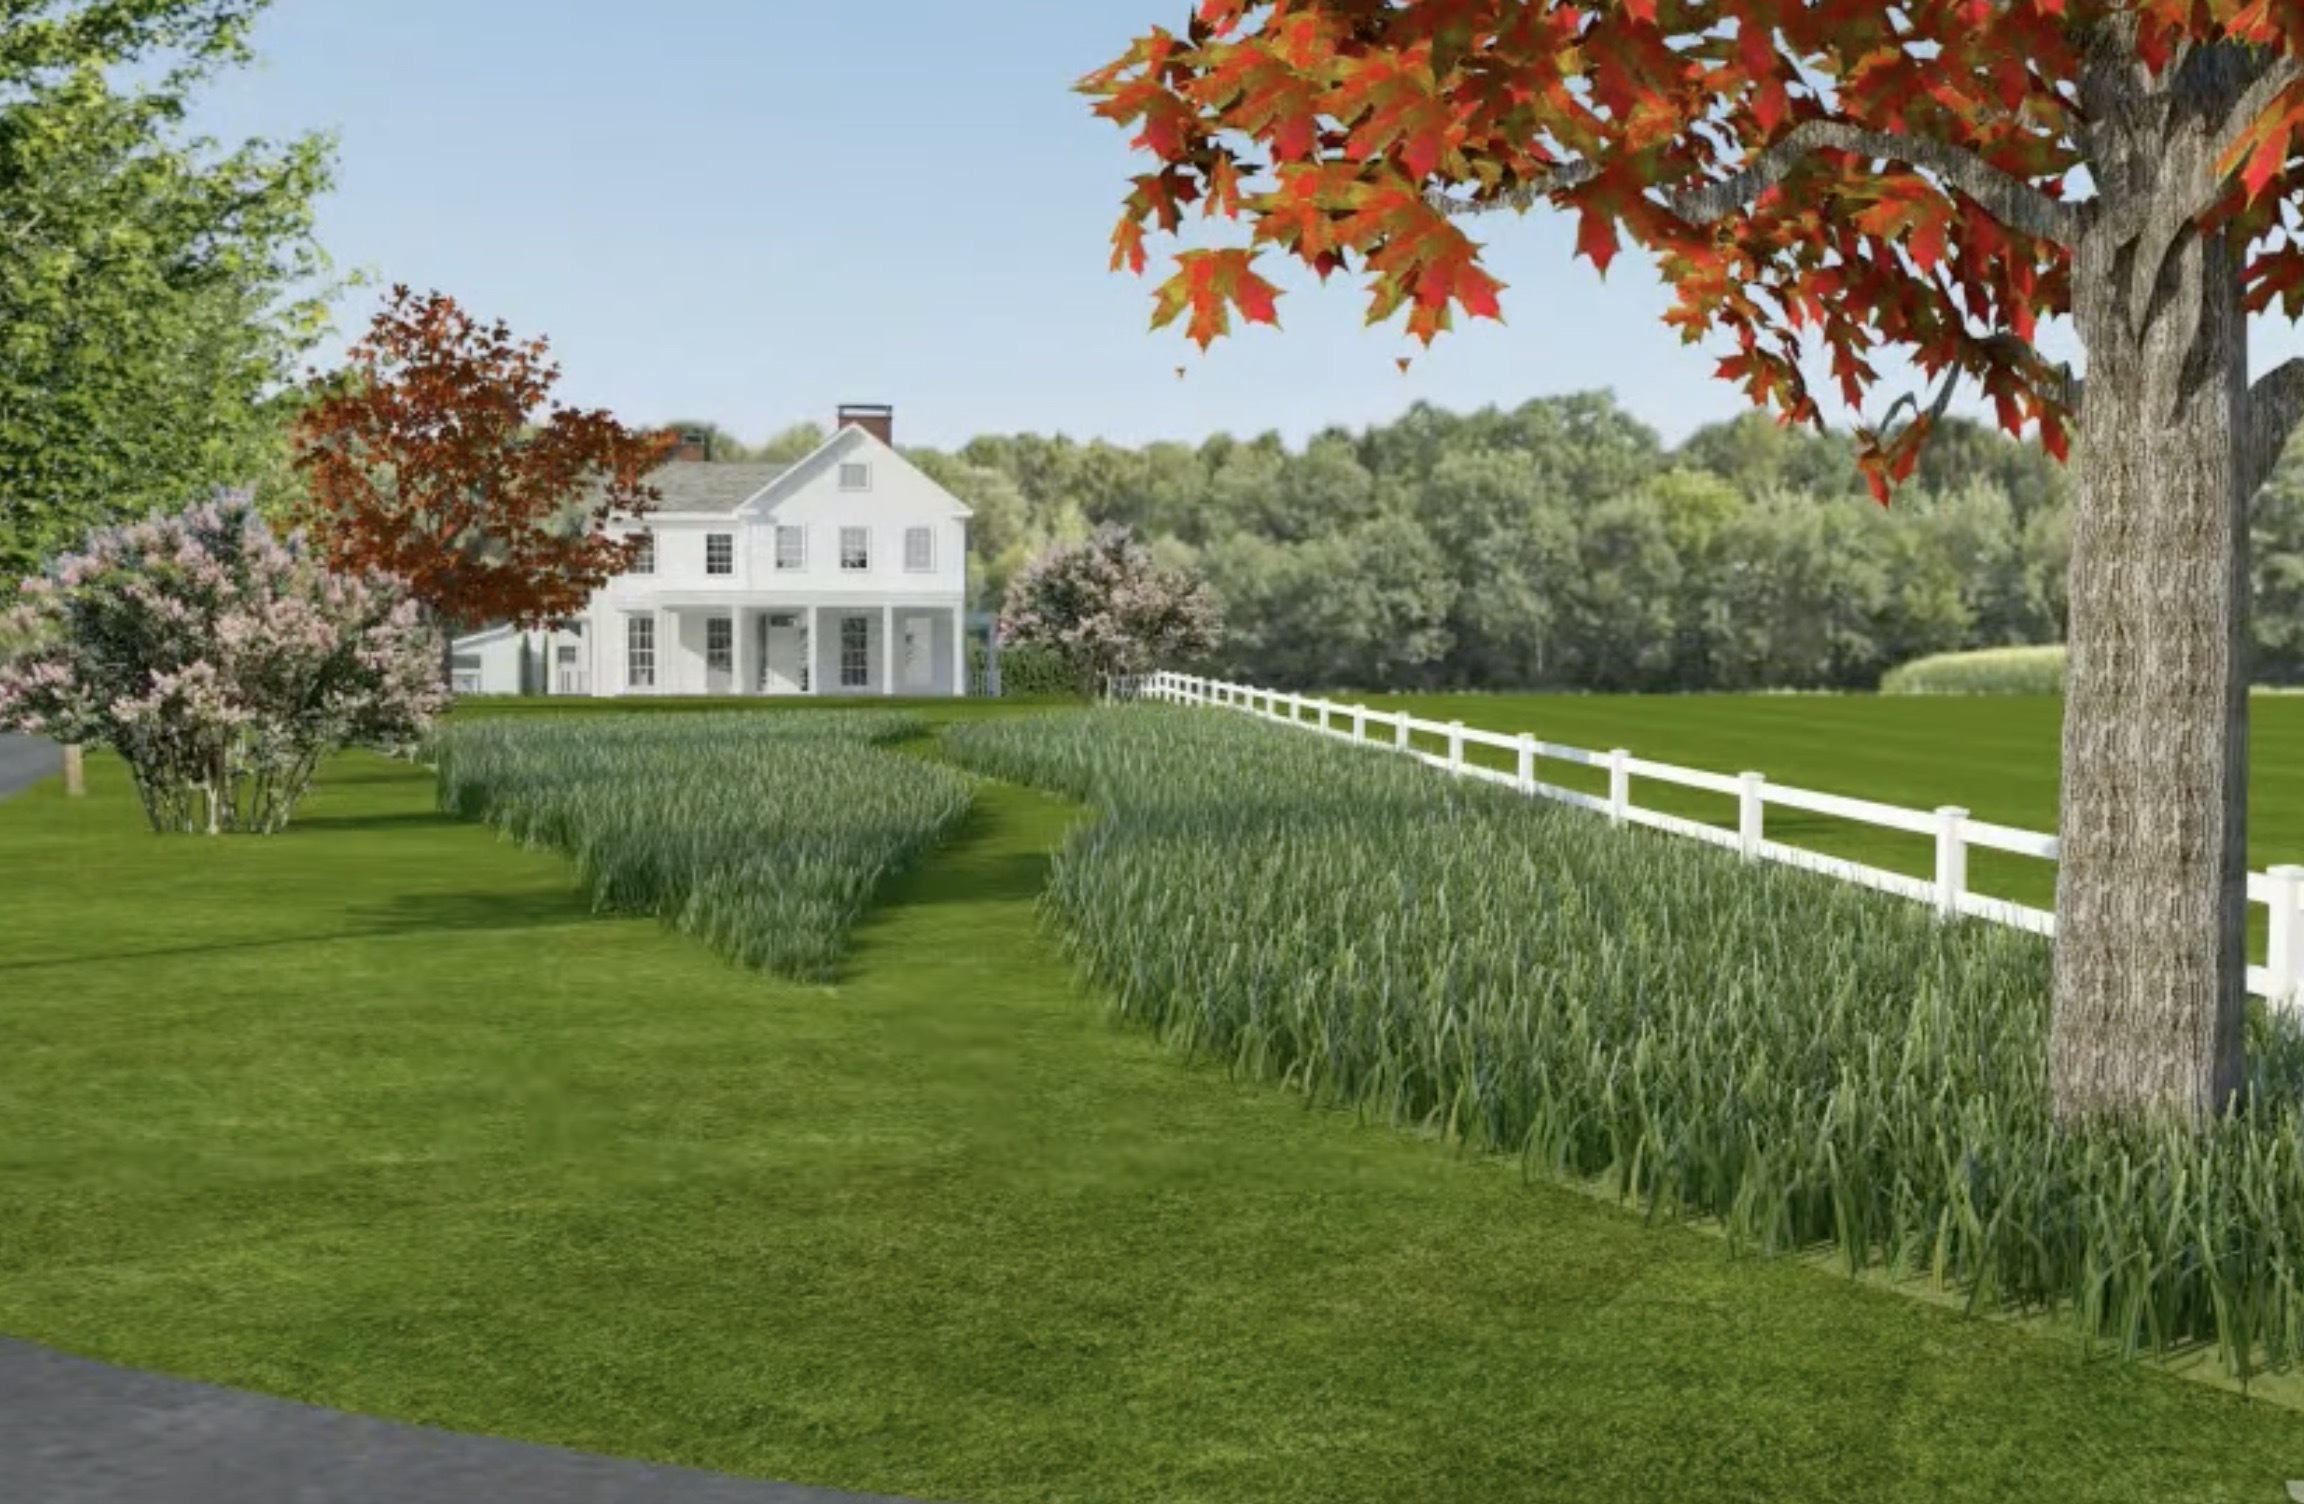 Rendering of proposed Peyton house at 26 Jermain Avenue. HPARB members noted that the rendering does not show the rise in the terrain on which the house will sit.